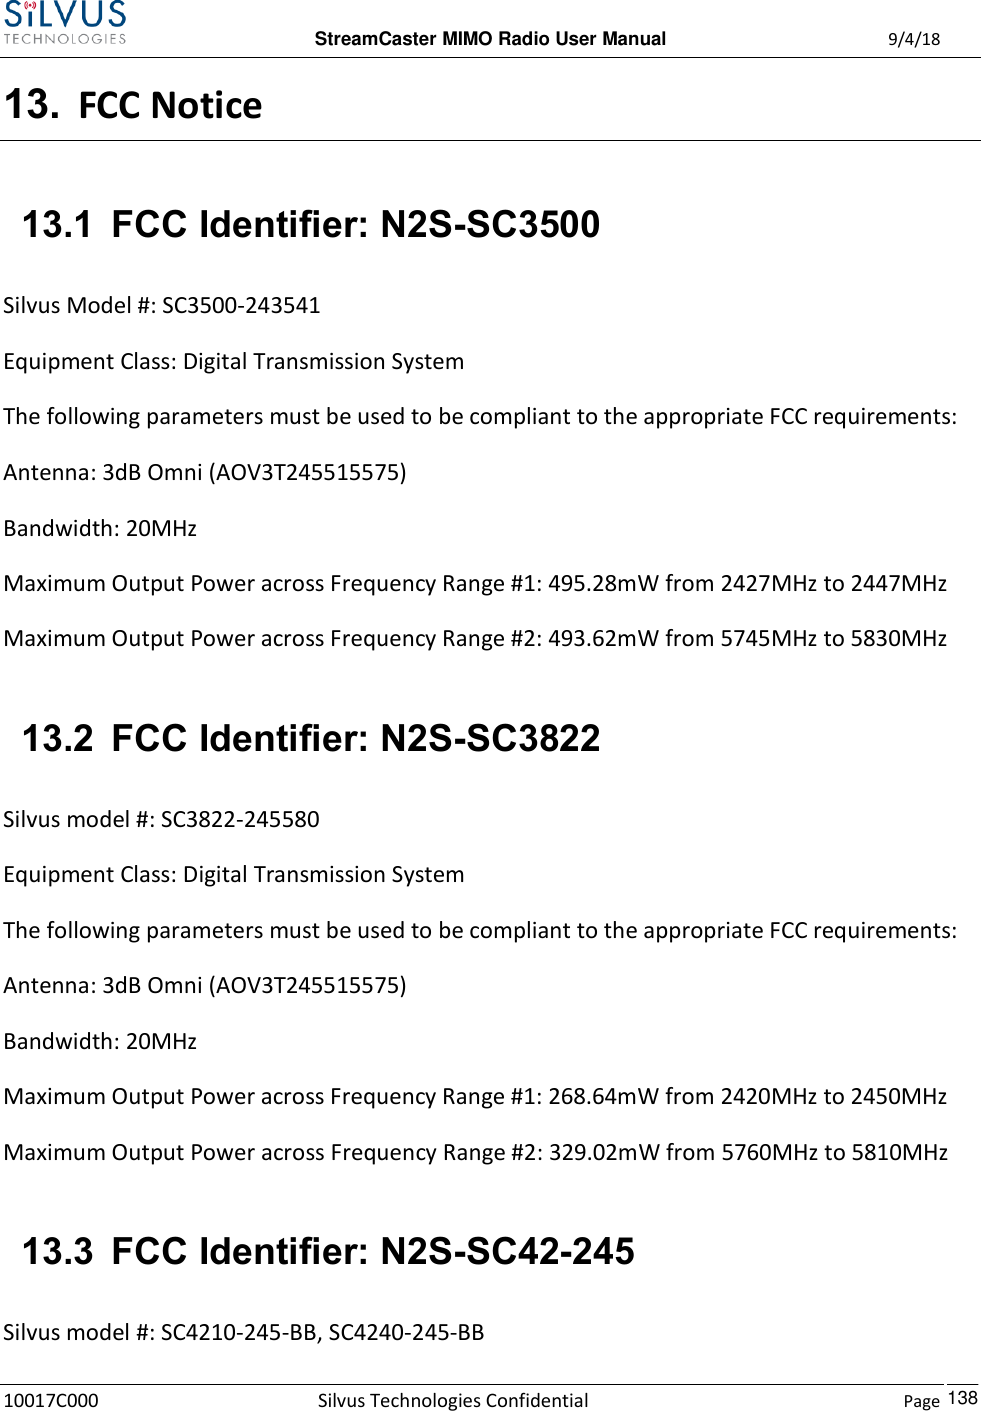  StreamCaster MIMO Radio User Manual  9/4/18 10017C000 Silvus Technologies Confidential    Page    138 13. FCC Notice 13.1 FCC Identifier: N2S-SC3500 Silvus Model #: SC3500-243541 Equipment Class: Digital Transmission System The following parameters must be used to be compliant to the appropriate FCC requirements:  Antenna: 3dB Omni (AOV3T245515575) Bandwidth: 20MHz Maximum Output Power across Frequency Range #1: 495.28mW from 2427MHz to 2447MHz  Maximum Output Power across Frequency Range #2: 493.62mW from 5745MHz to 5830MHz  13.2 FCC Identifier: N2S-SC3822 Silvus model #: SC3822-245580 Equipment Class: Digital Transmission System The following parameters must be used to be compliant to the appropriate FCC requirements:  Antenna: 3dB Omni (AOV3T245515575) Bandwidth: 20MHz Maximum Output Power across Frequency Range #1: 268.64mW from 2420MHz to 2450MHz  Maximum Output Power across Frequency Range #2: 329.02mW from 5760MHz to 5810MHz  13.3 FCC Identifier: N2S-SC42-245 Silvus model #: SC4210-245-BB, SC4240-245-BB 